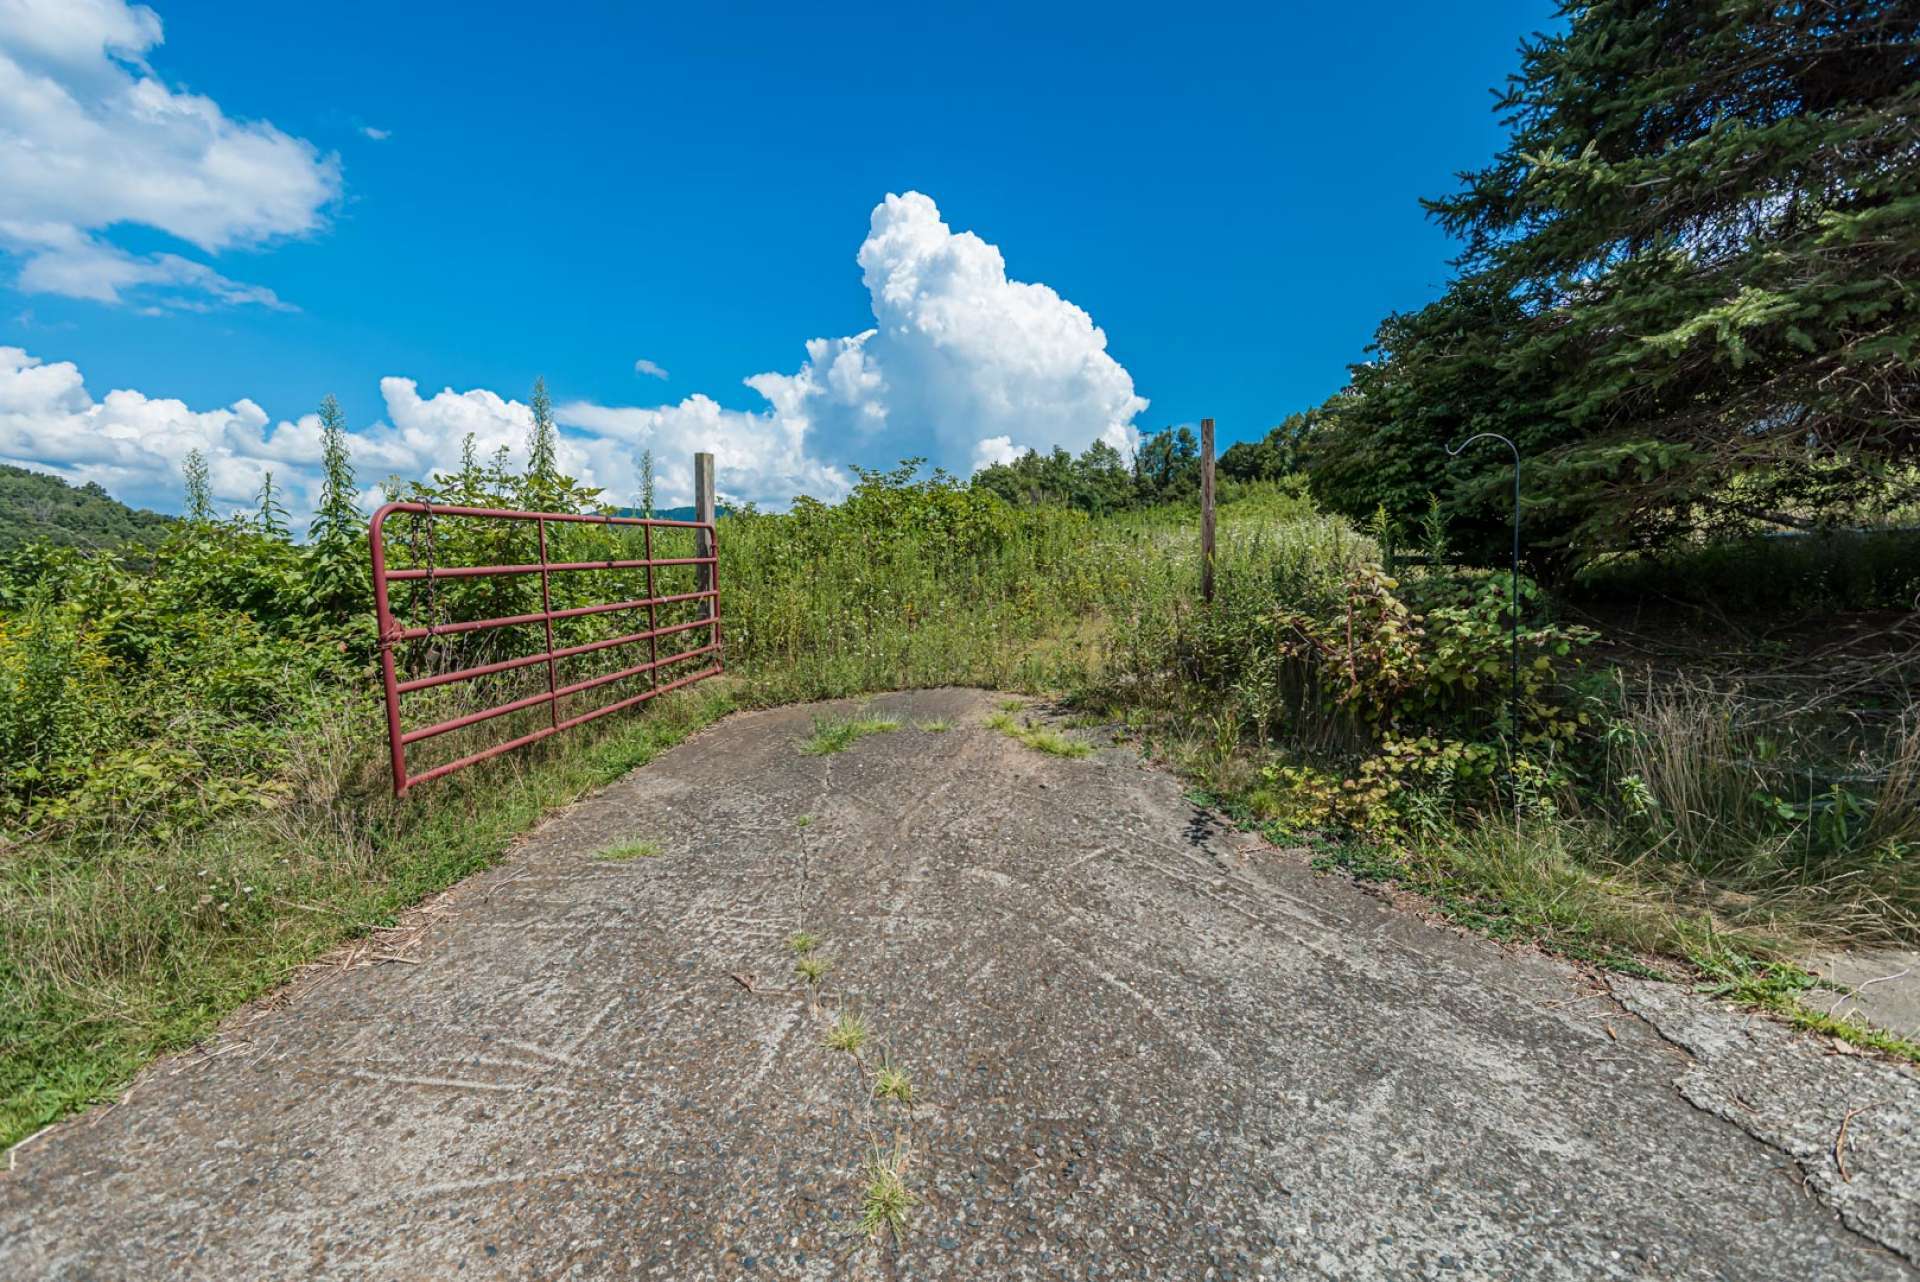 A paved access from the paved state maintained road provides easy access all year round.  The Warrensville location is only minutes into downtown West Jefferson and close to all amenities of the NC High Country.